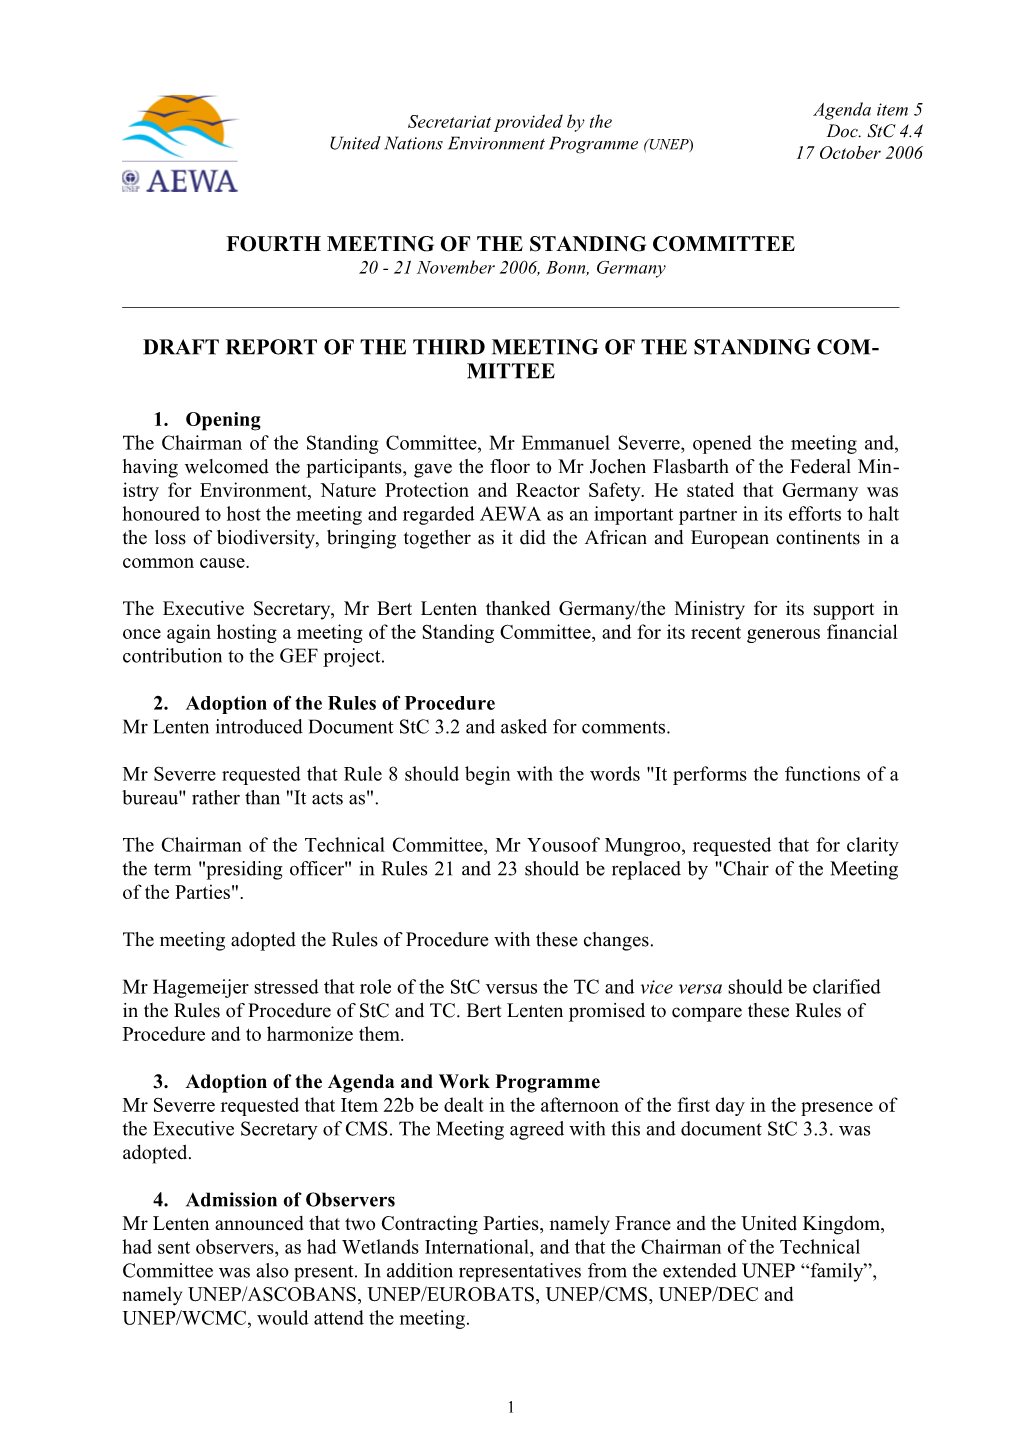 Fourth Meeting of the Standing Committee